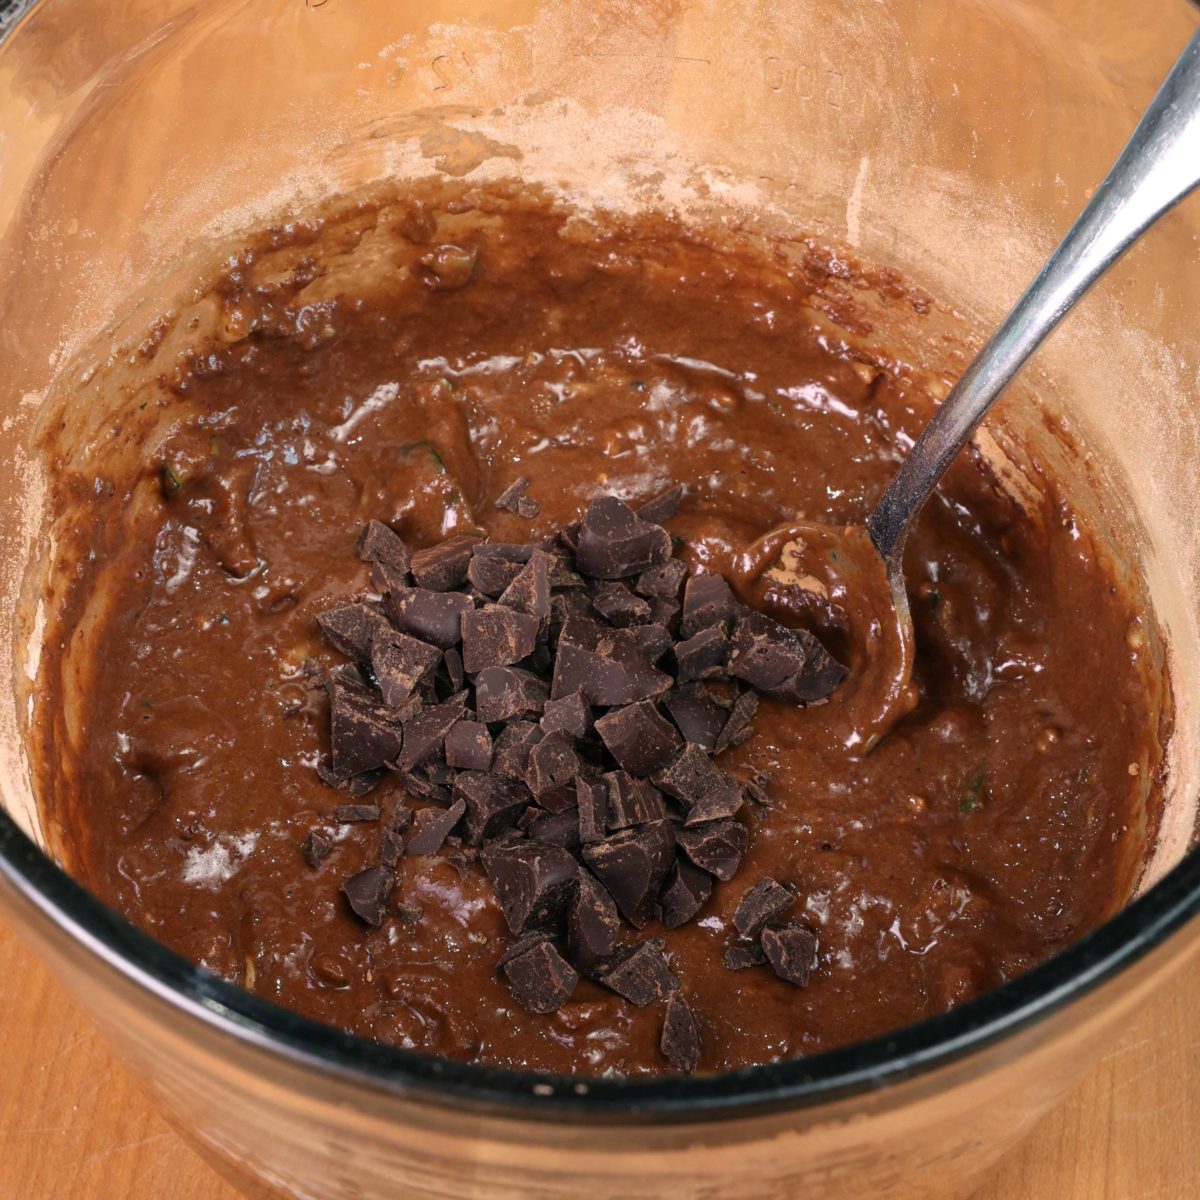 chocolate chips in a mixing bowl with chocolate cake batter.